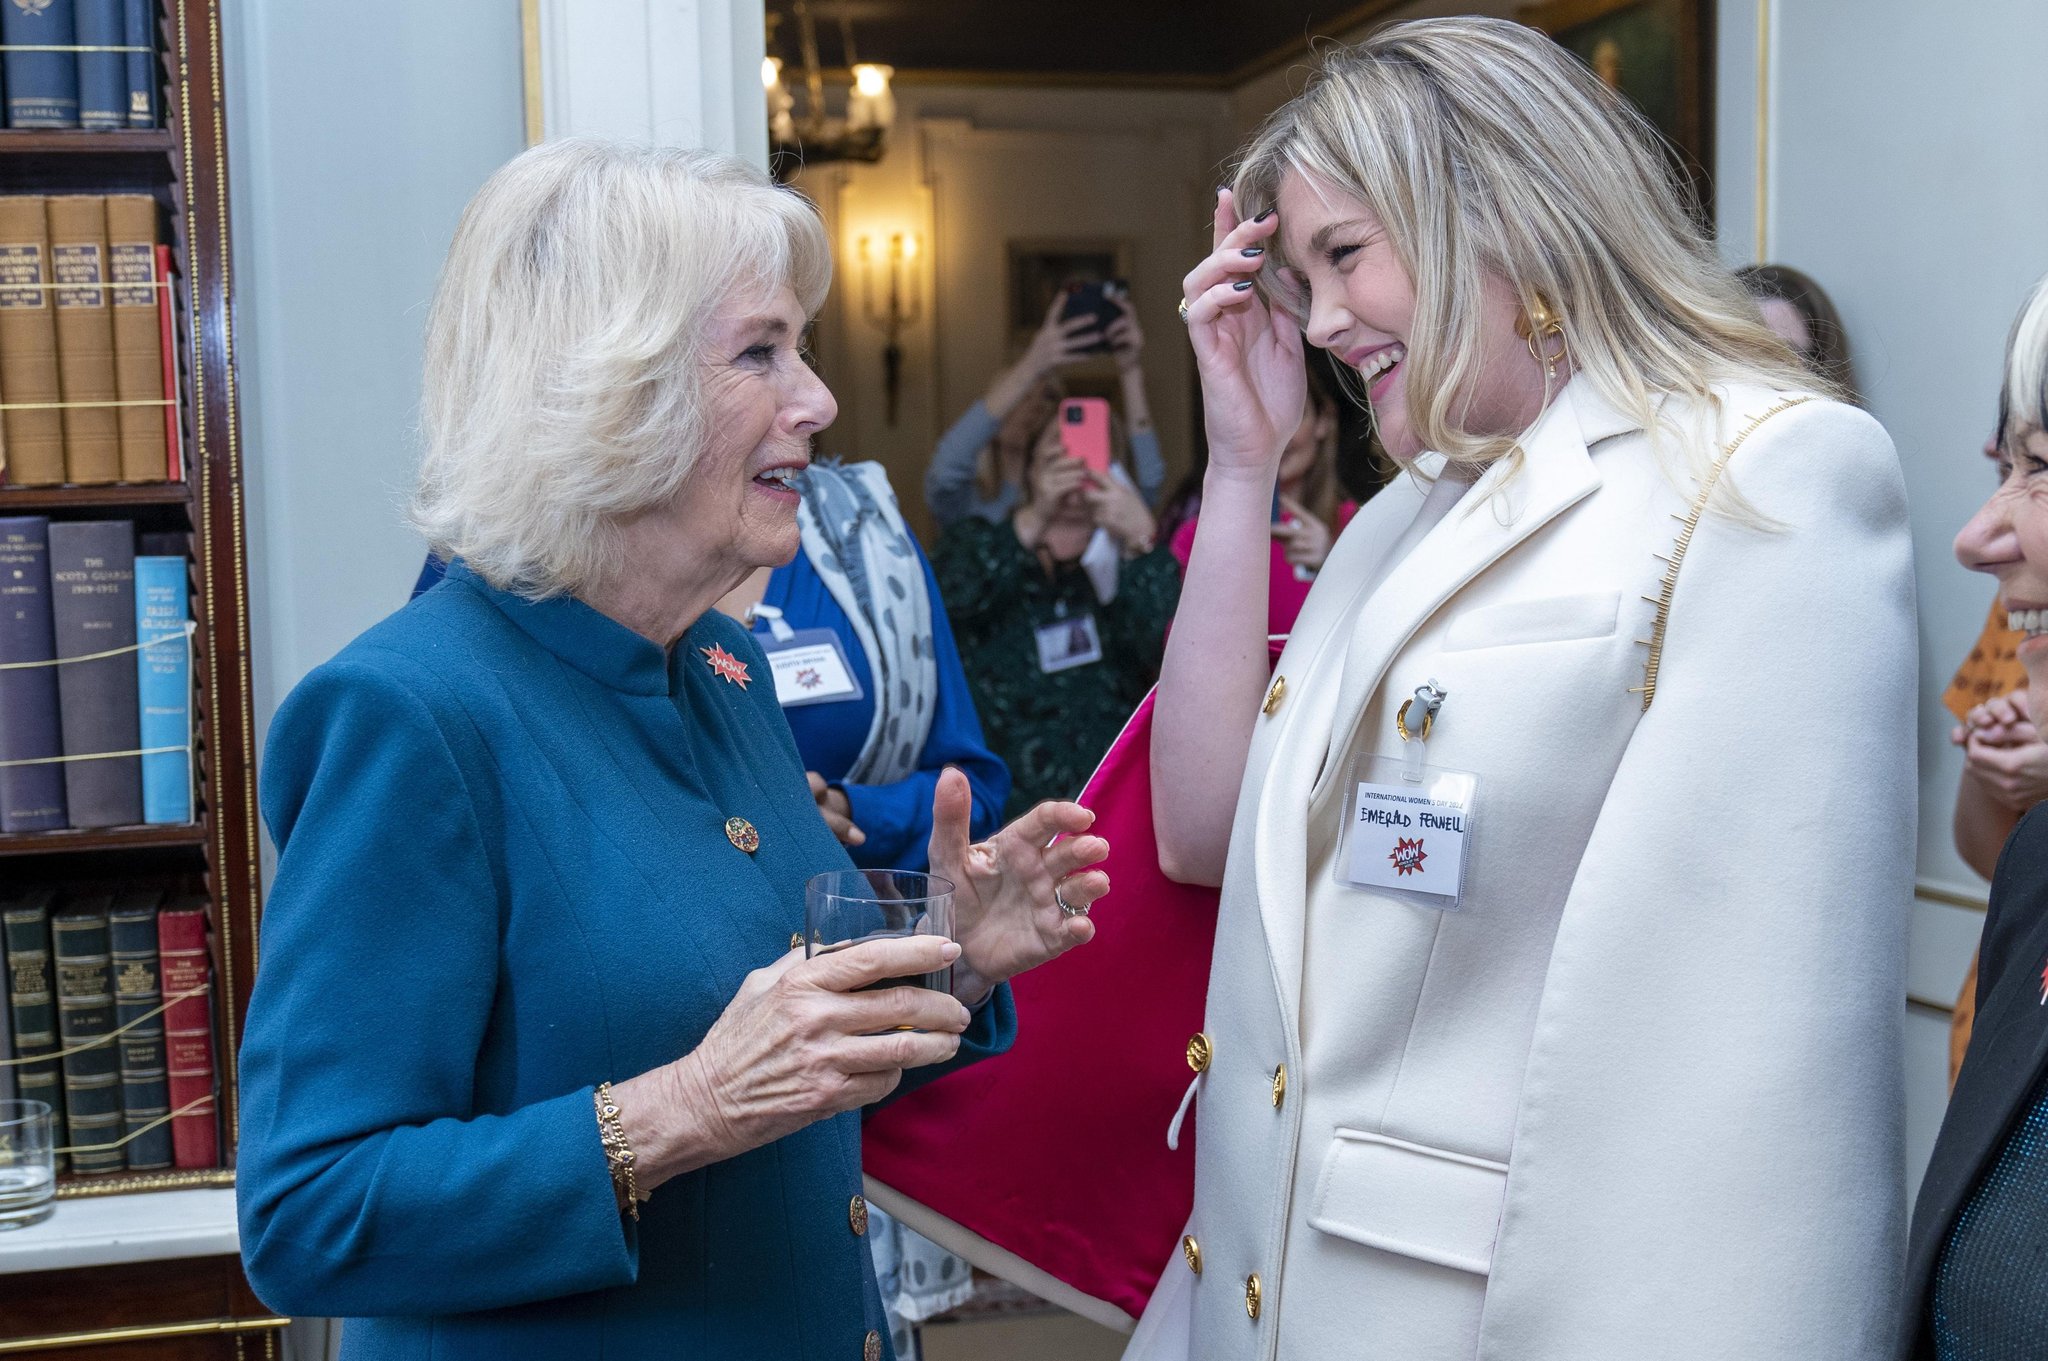 Camilla meets actress who played her in The Crown